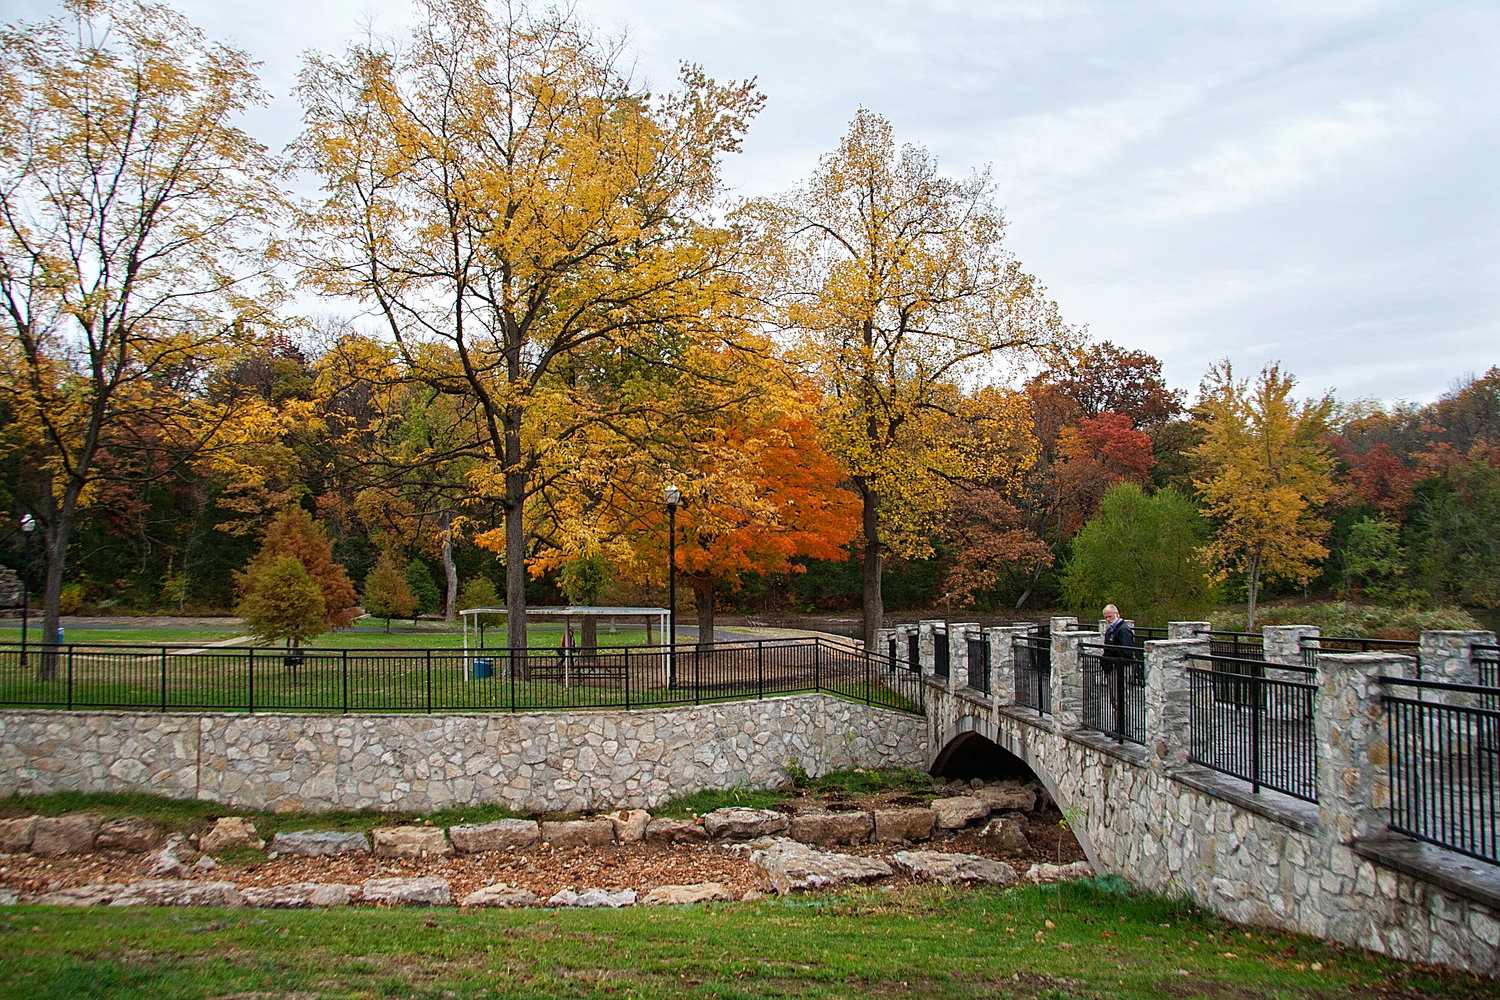 The Sequiota Park expansion would increase its footprint by more than 127%.